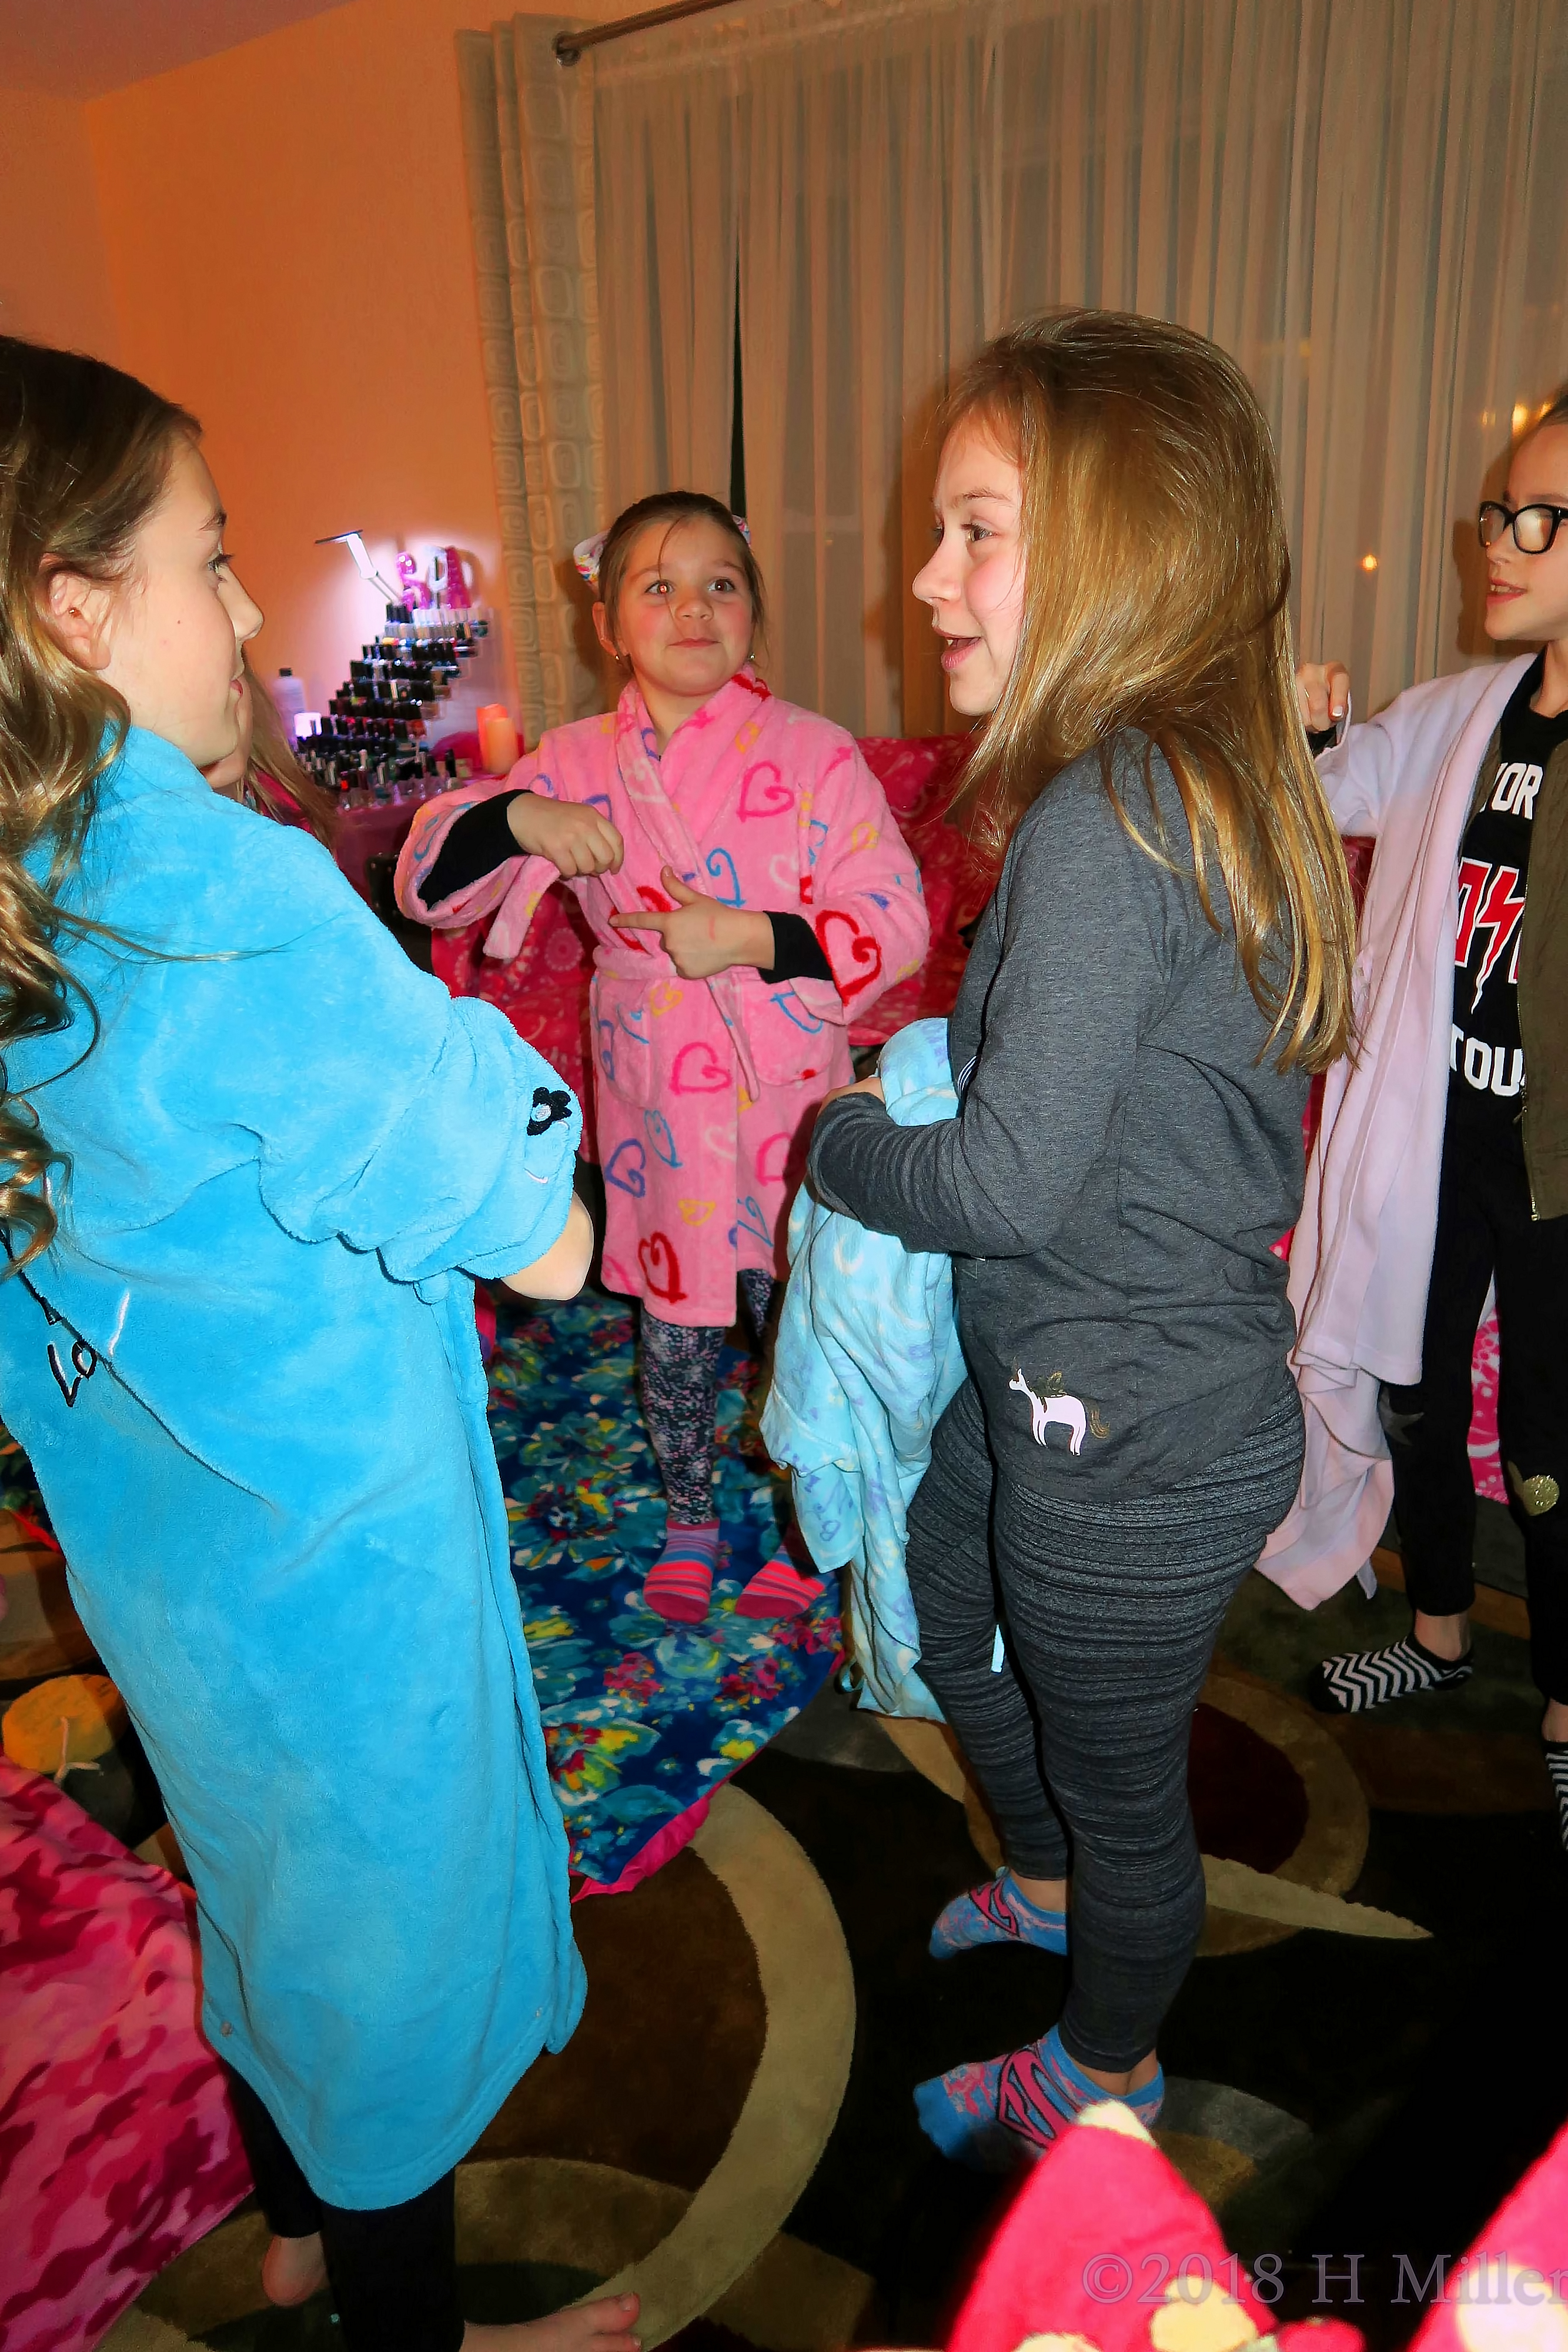 Chatting In Comfort! Kids Spa Robes Are On! 